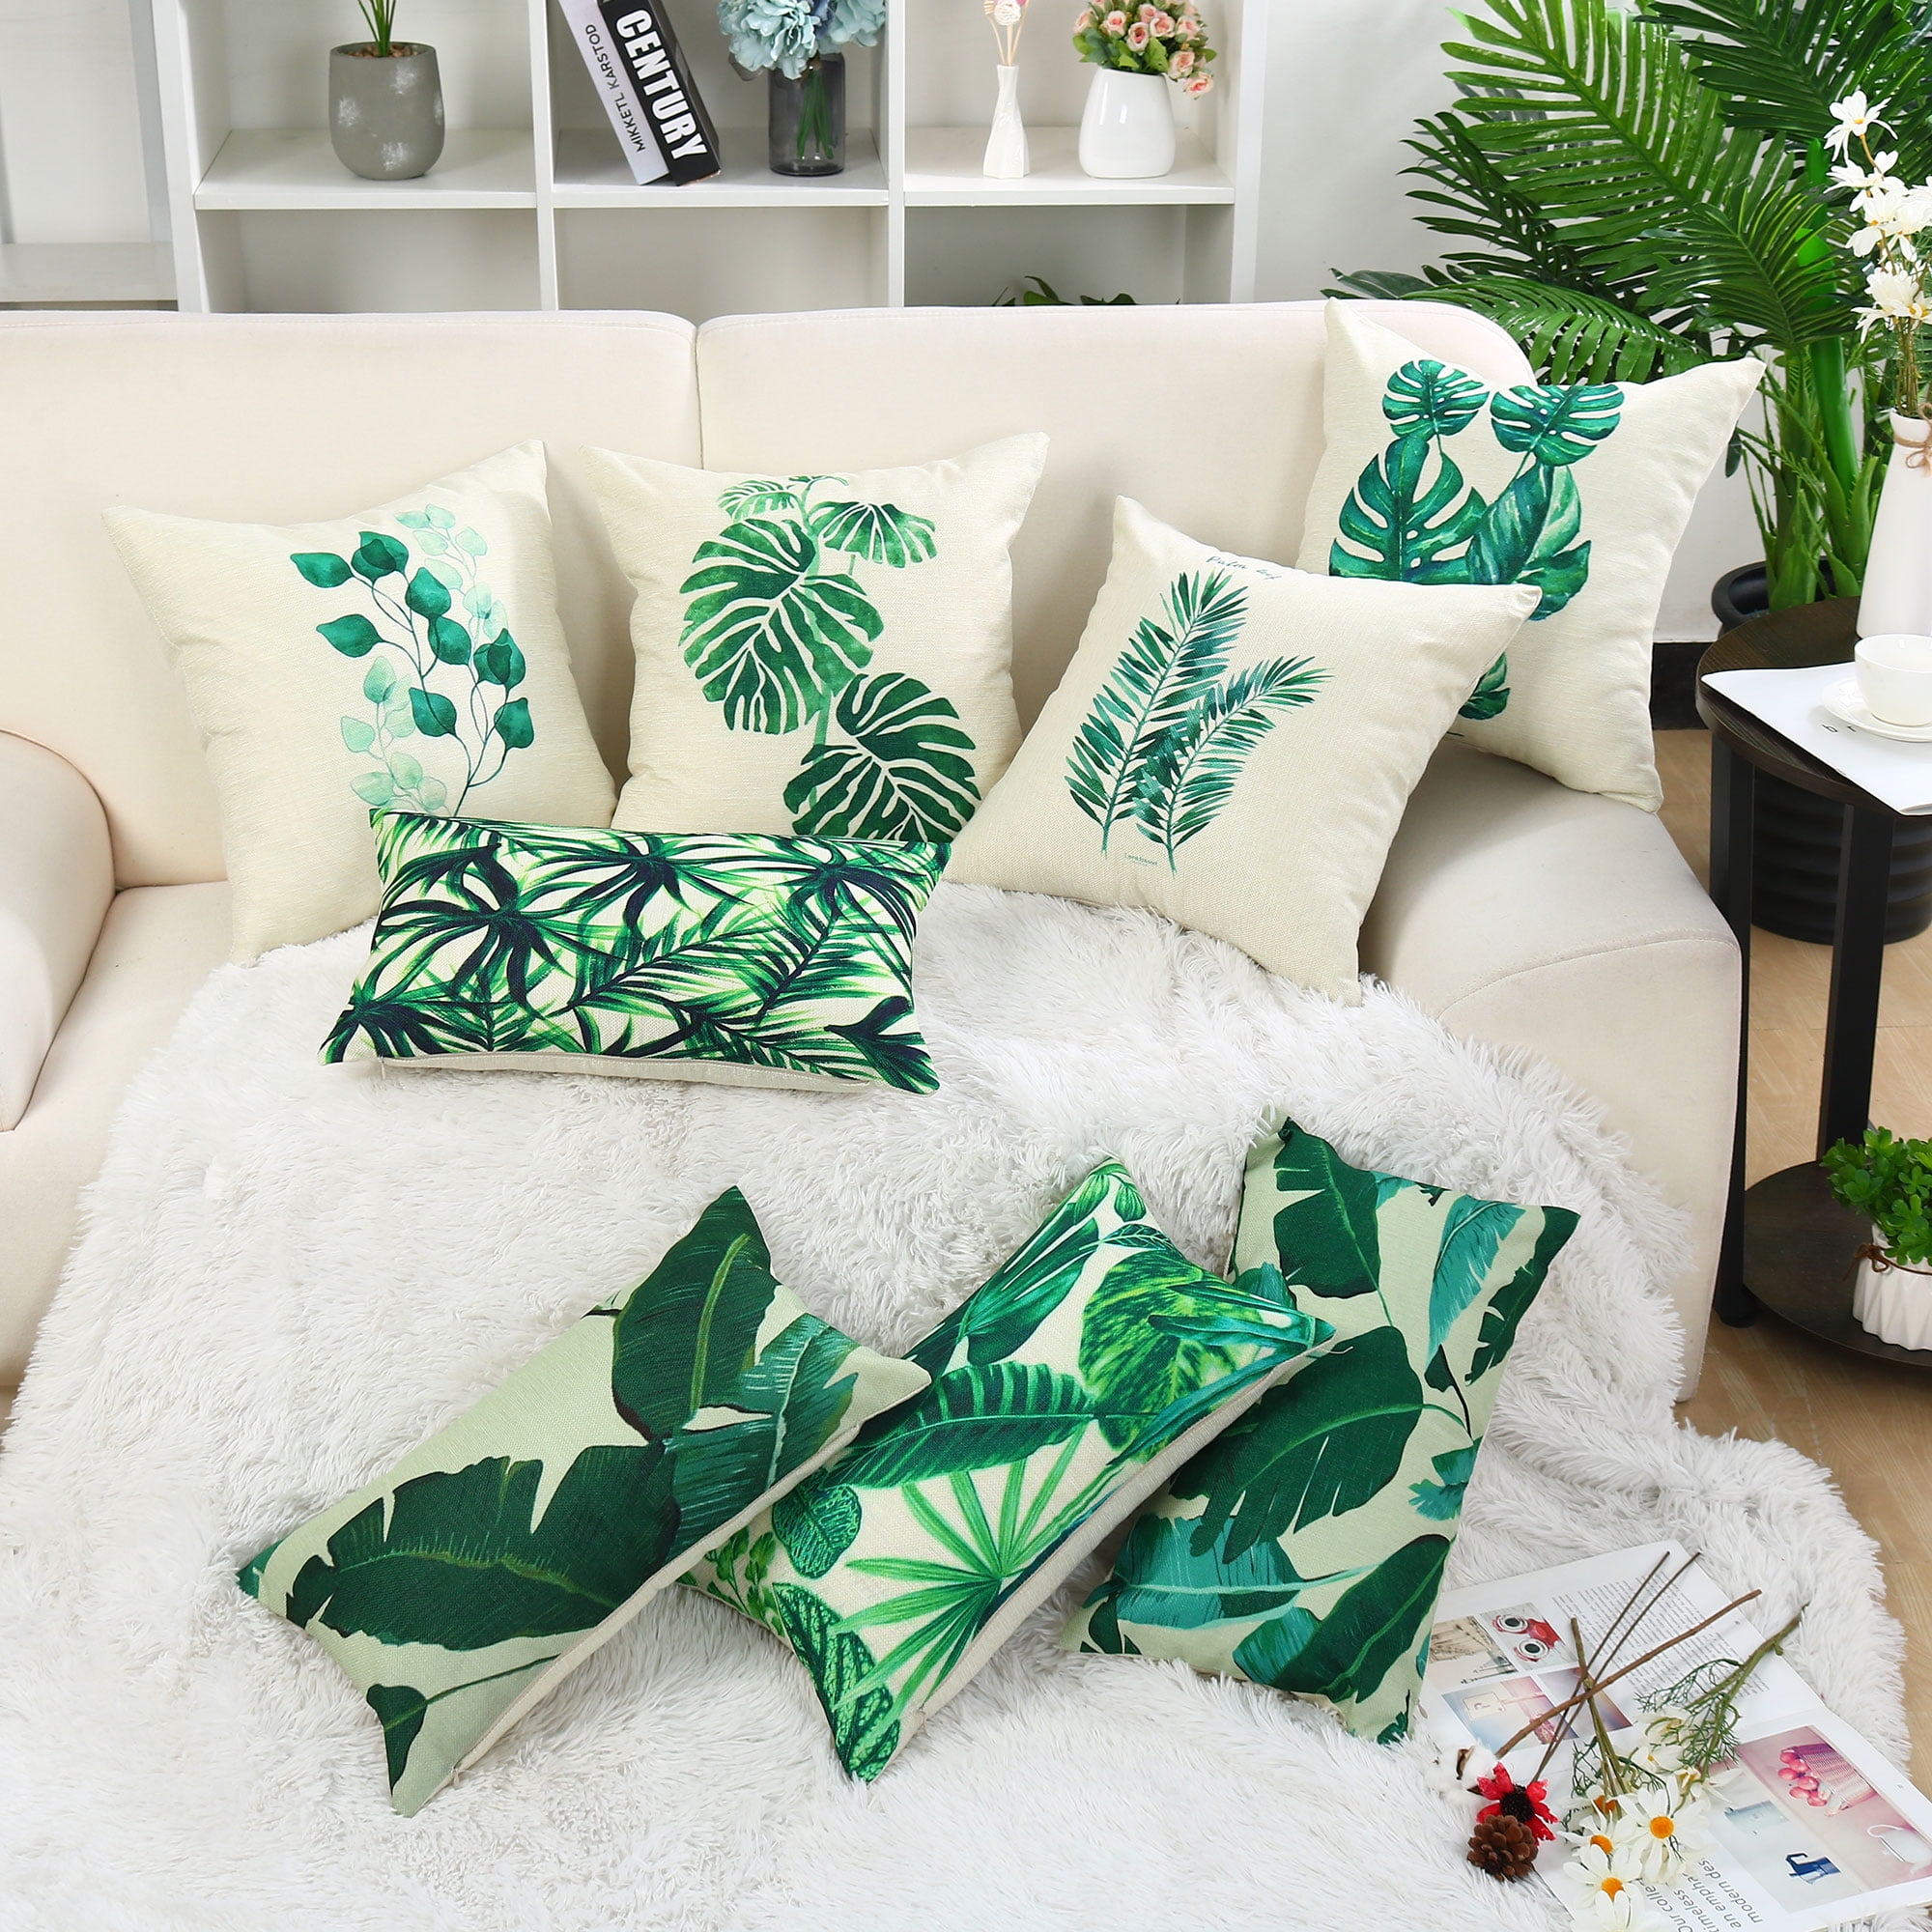 Green Leaves Printed Throw Pillow Decorative Bedroom Cover Cushion Case 45*45cm 